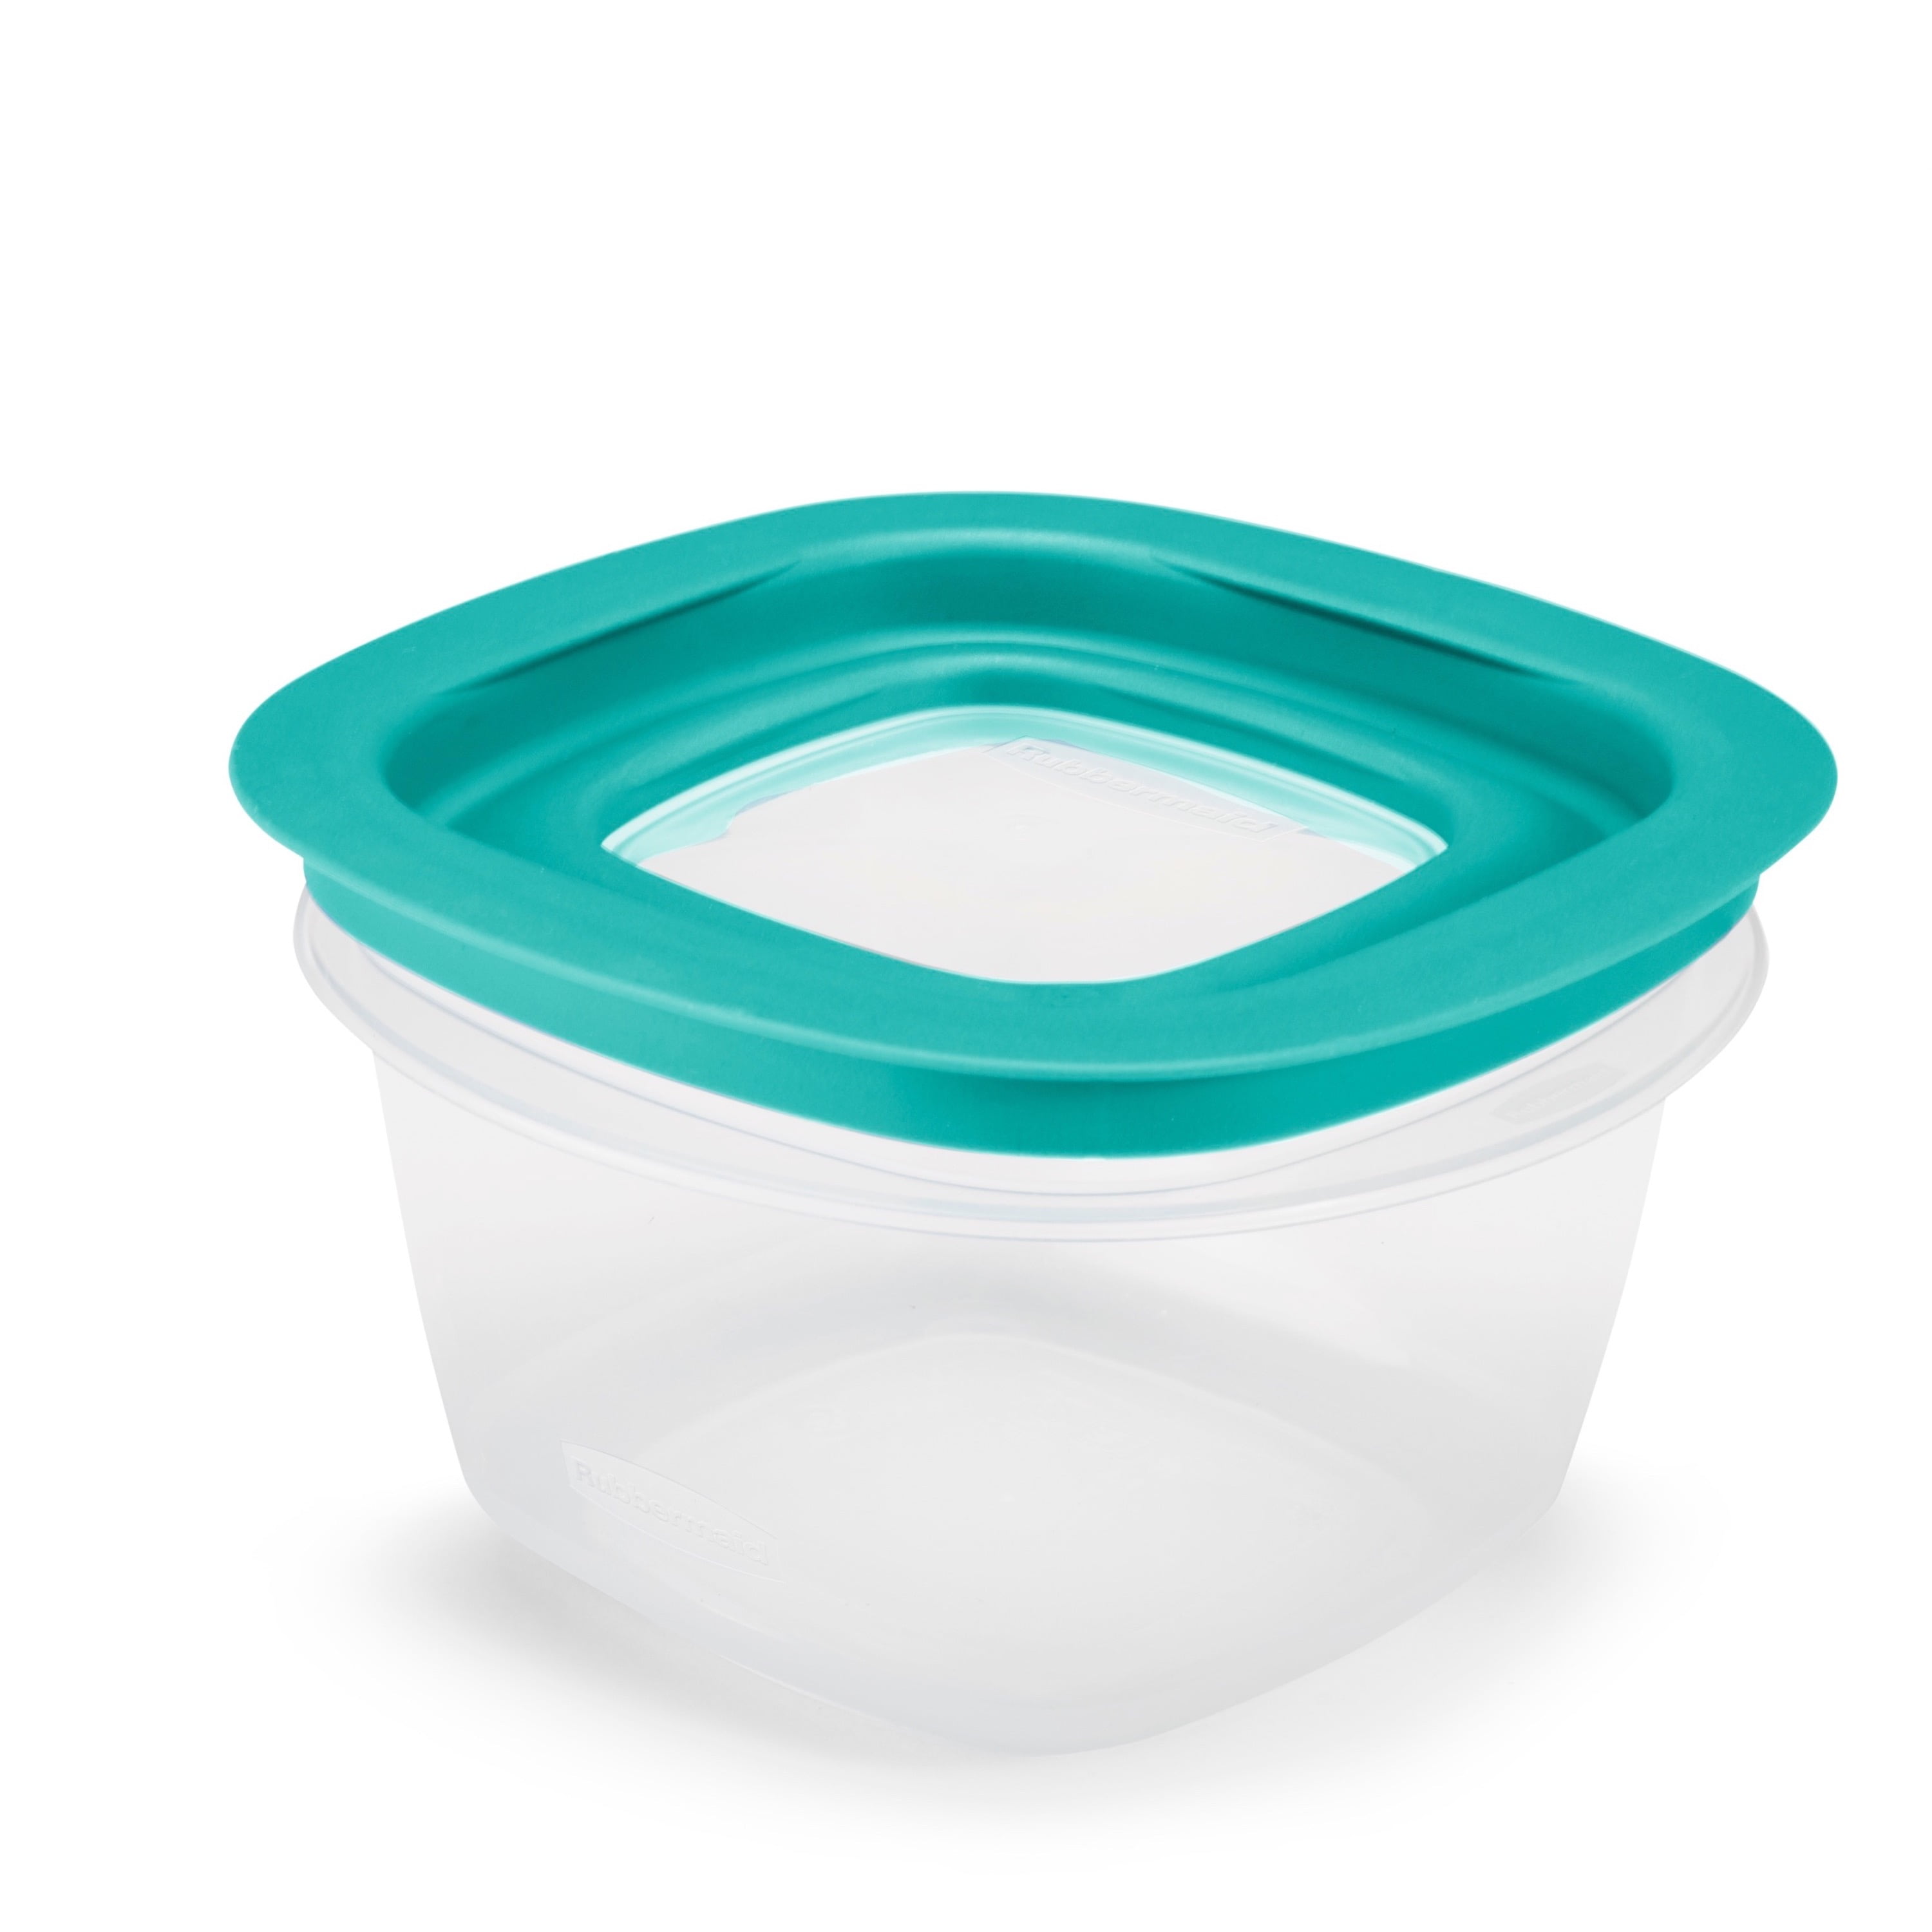 Rubbermaid Flex and Seal Set of 21 Variety Food Storage Containers, Teal  Lids 